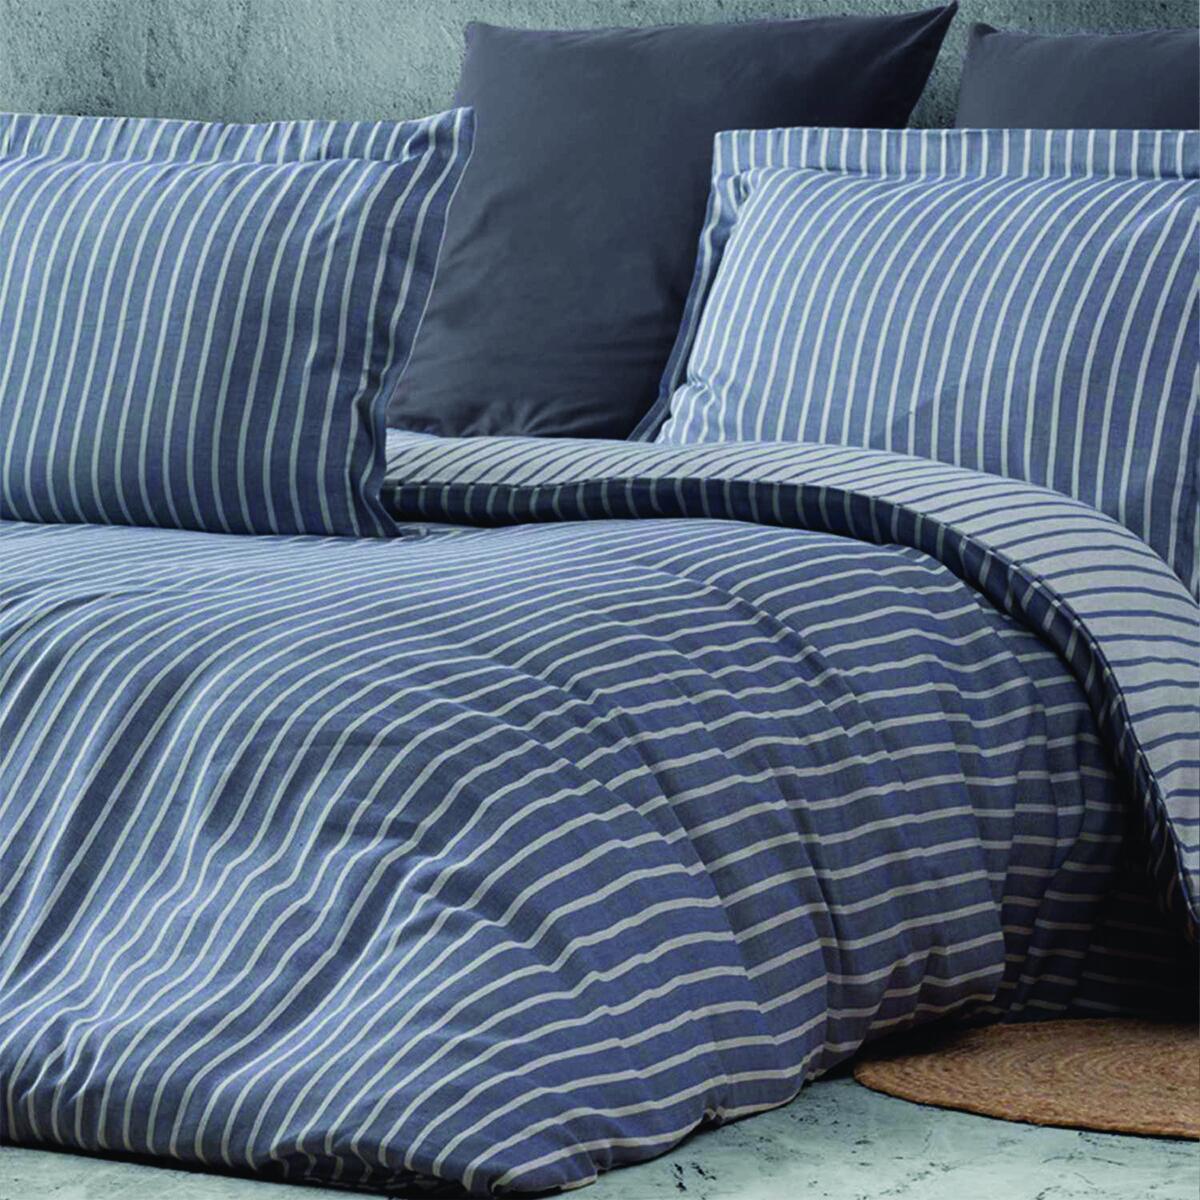 Bamboo Striped Anthracite Double Duvet Cover Set